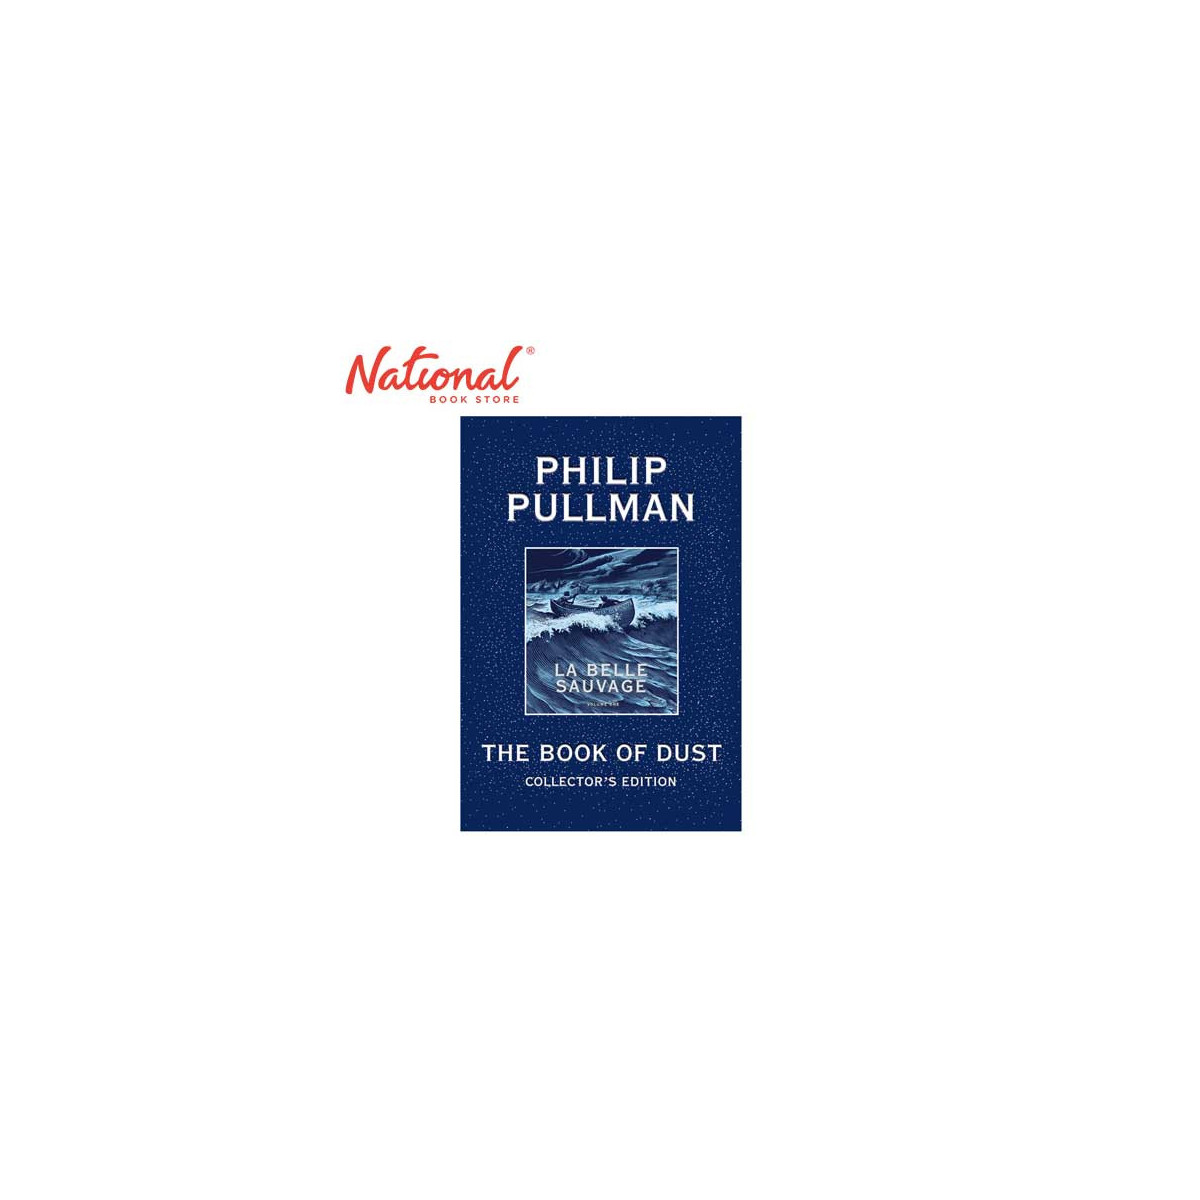 The Book of Dust: La Belle Sauvage Collector's Edition (Book of Dust, Volume 1) by Philip Pullman